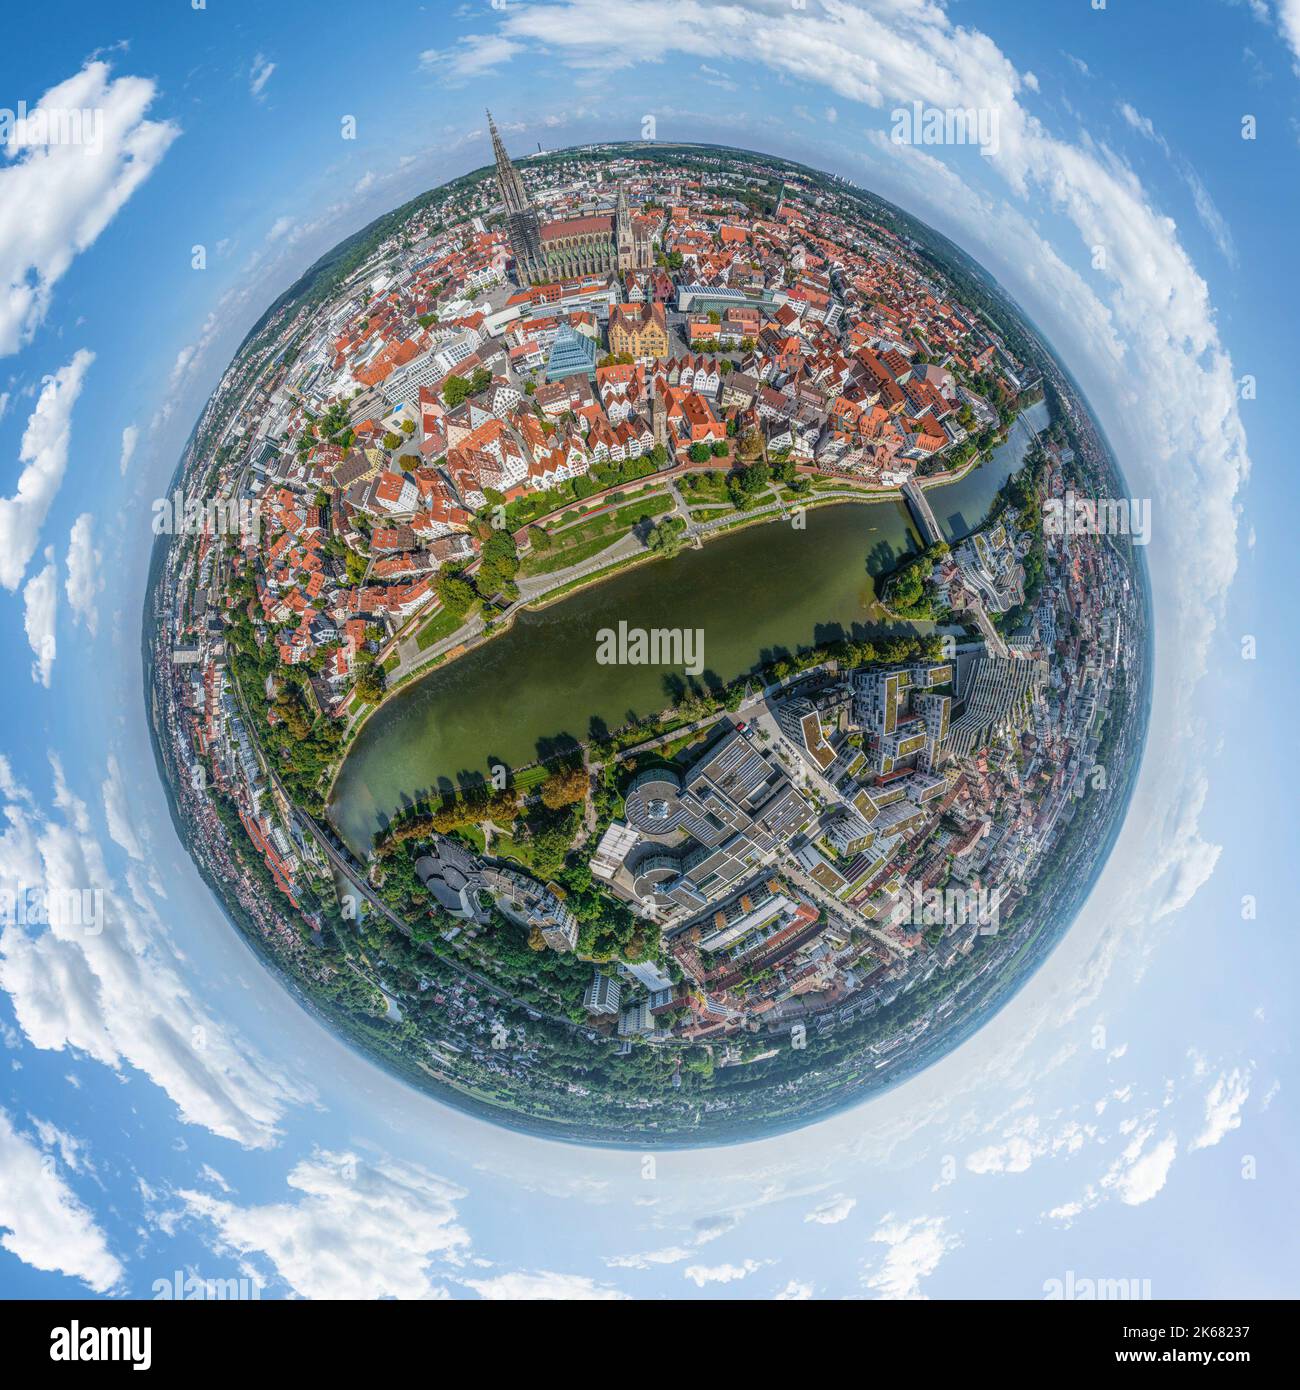 The twin cities of Ulm and Neu Ulm from above Stock Photo